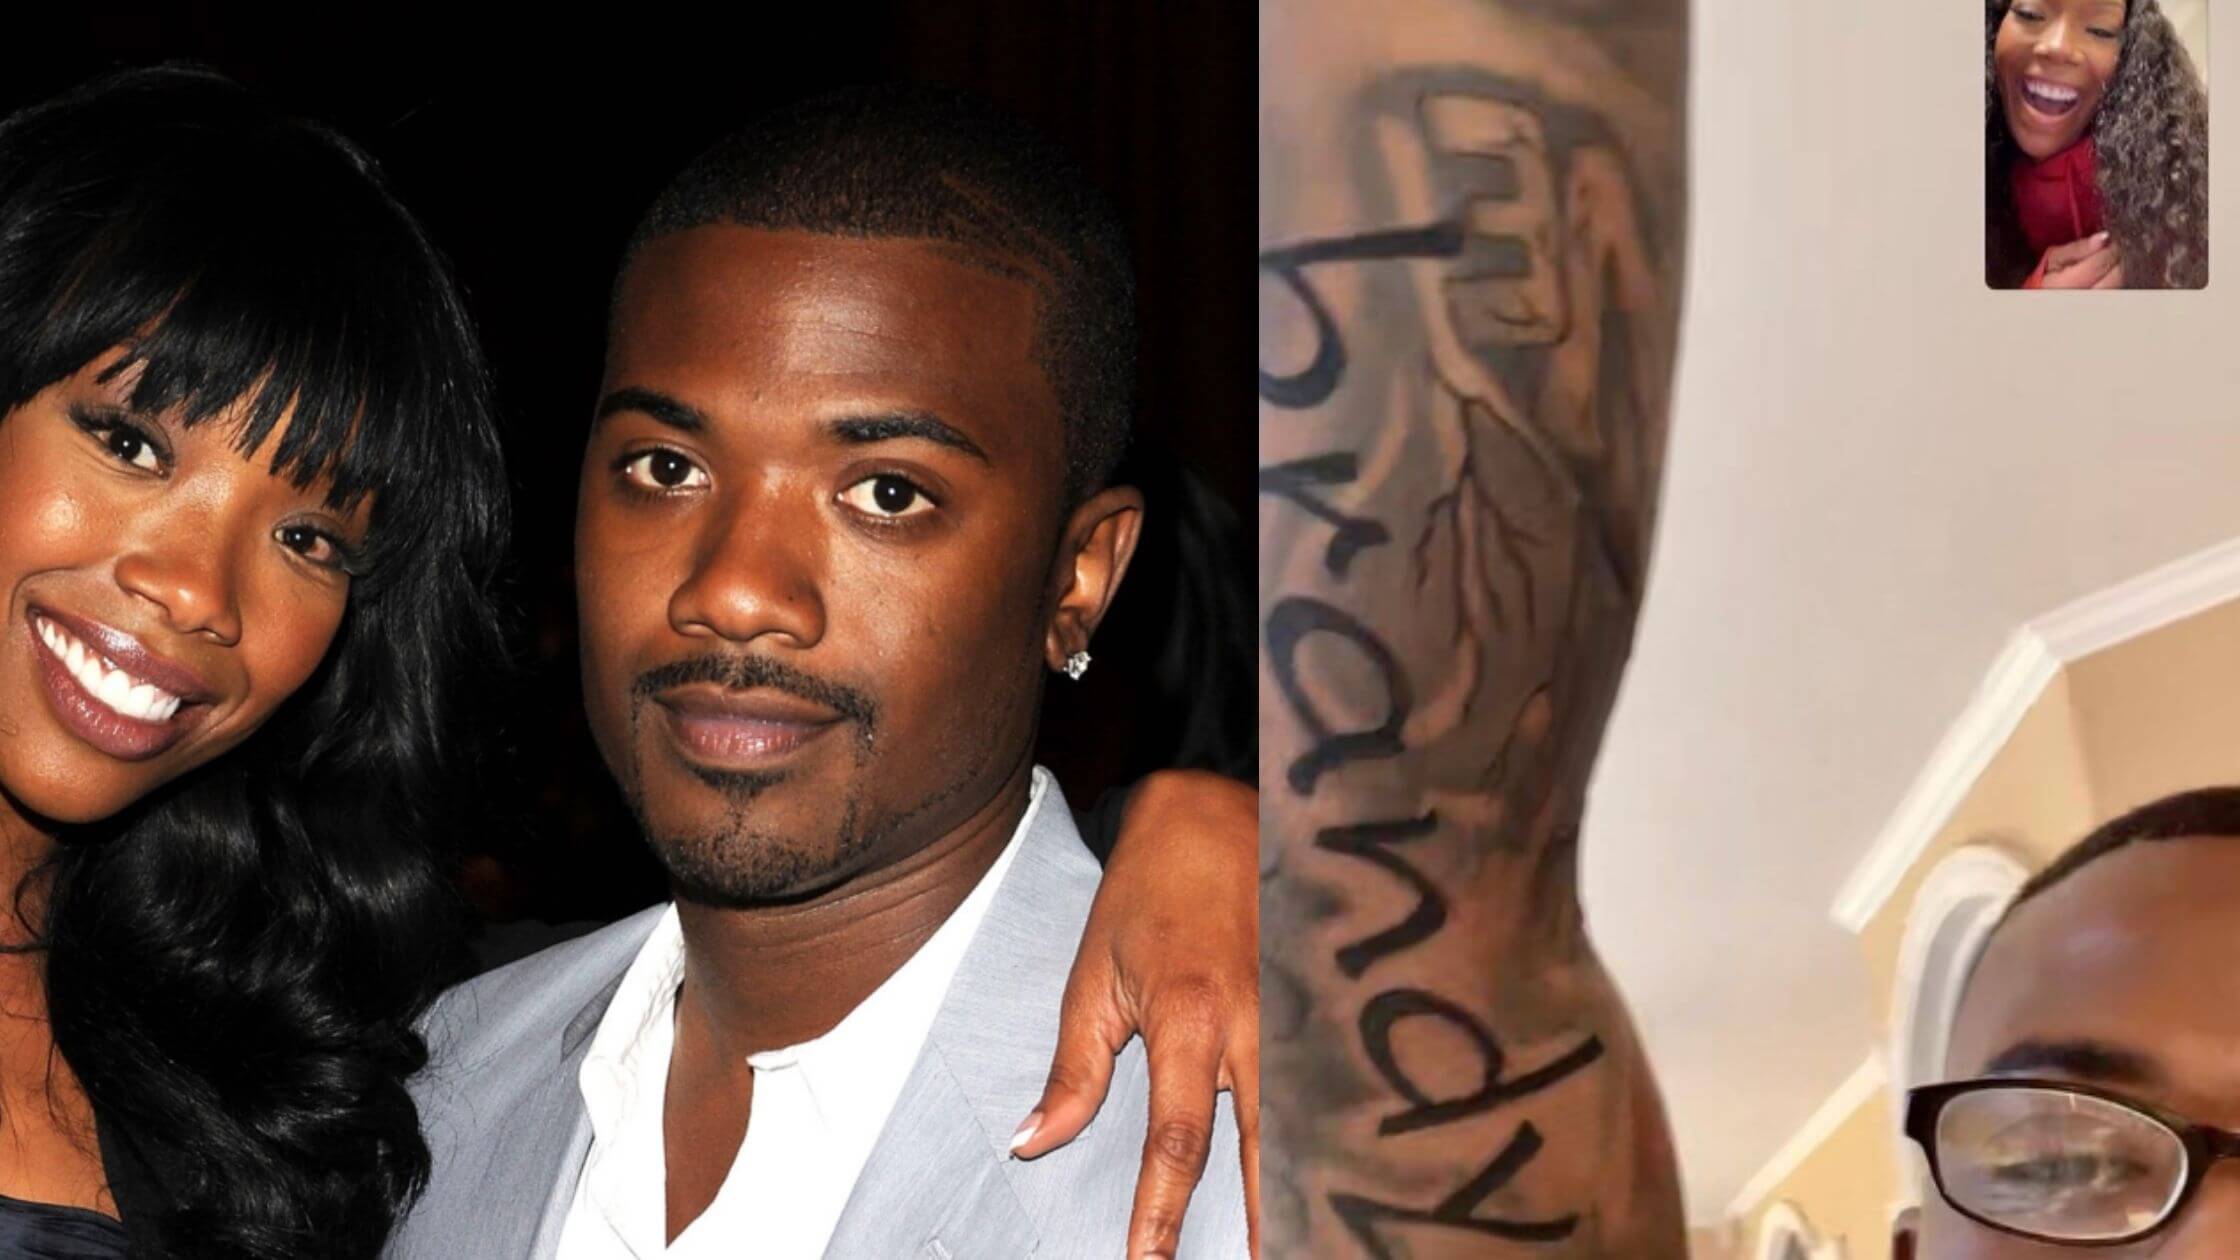 Ray J Shows Off New Leg Tattoo Featuring His Sister Brandy’s Face